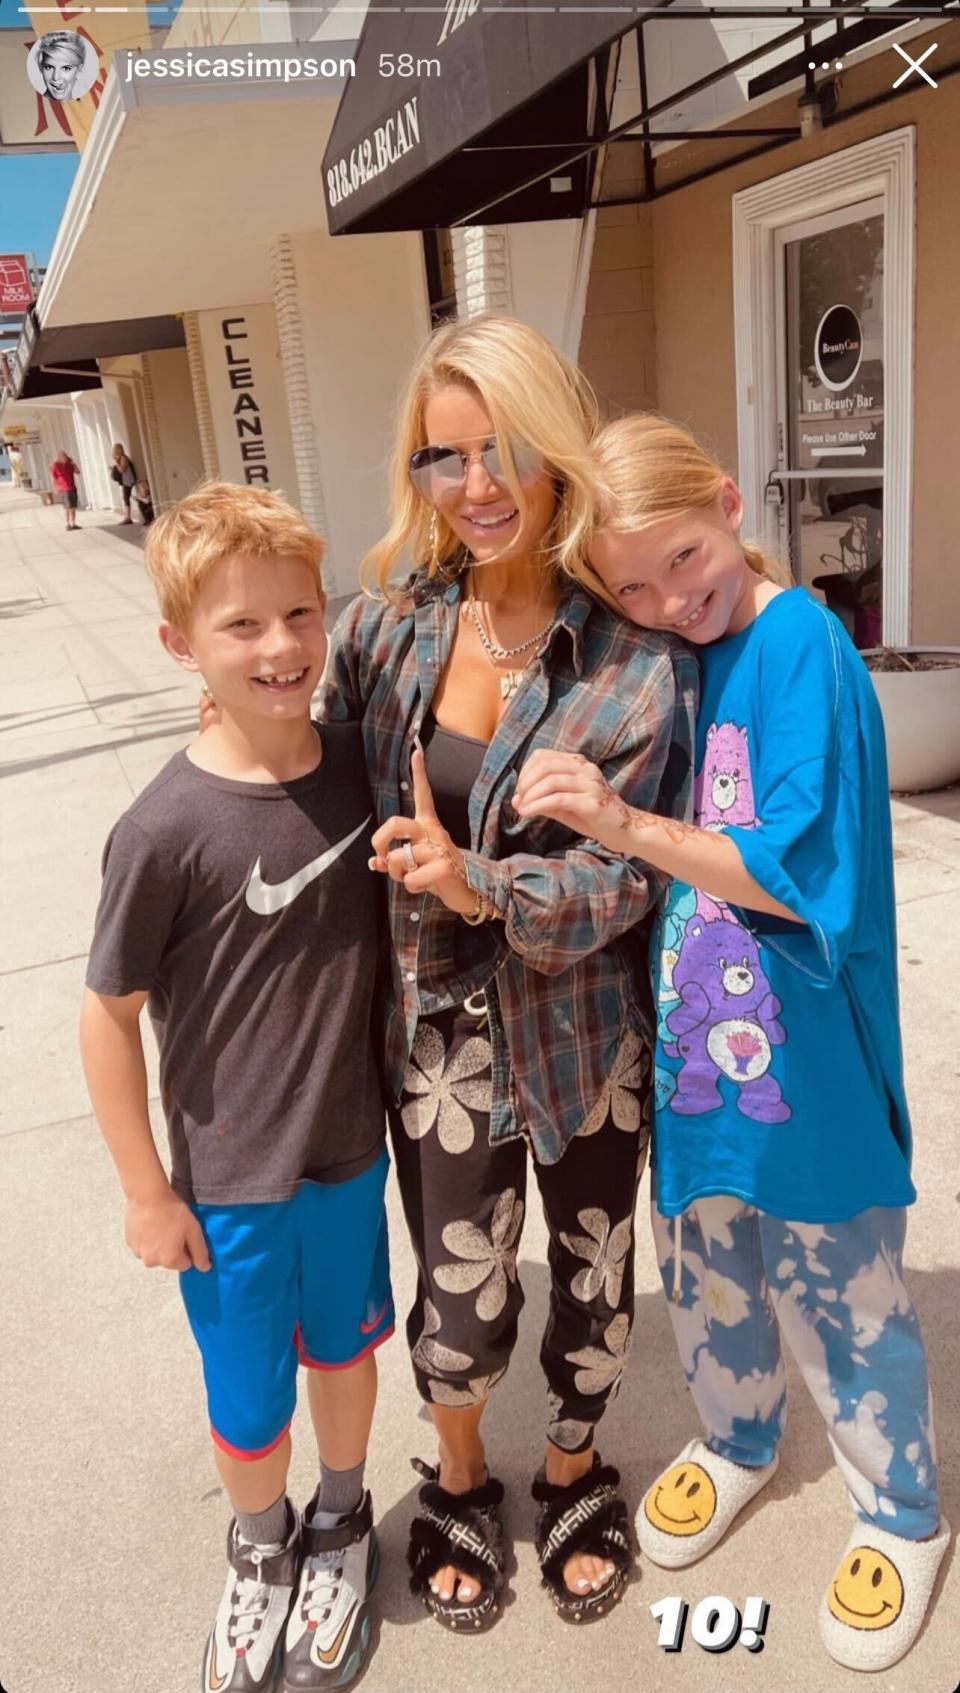 Jessica Simpson wearing a casual ensemble with slides while posing with her children Maxwell and Ace. - Credit: Instagram